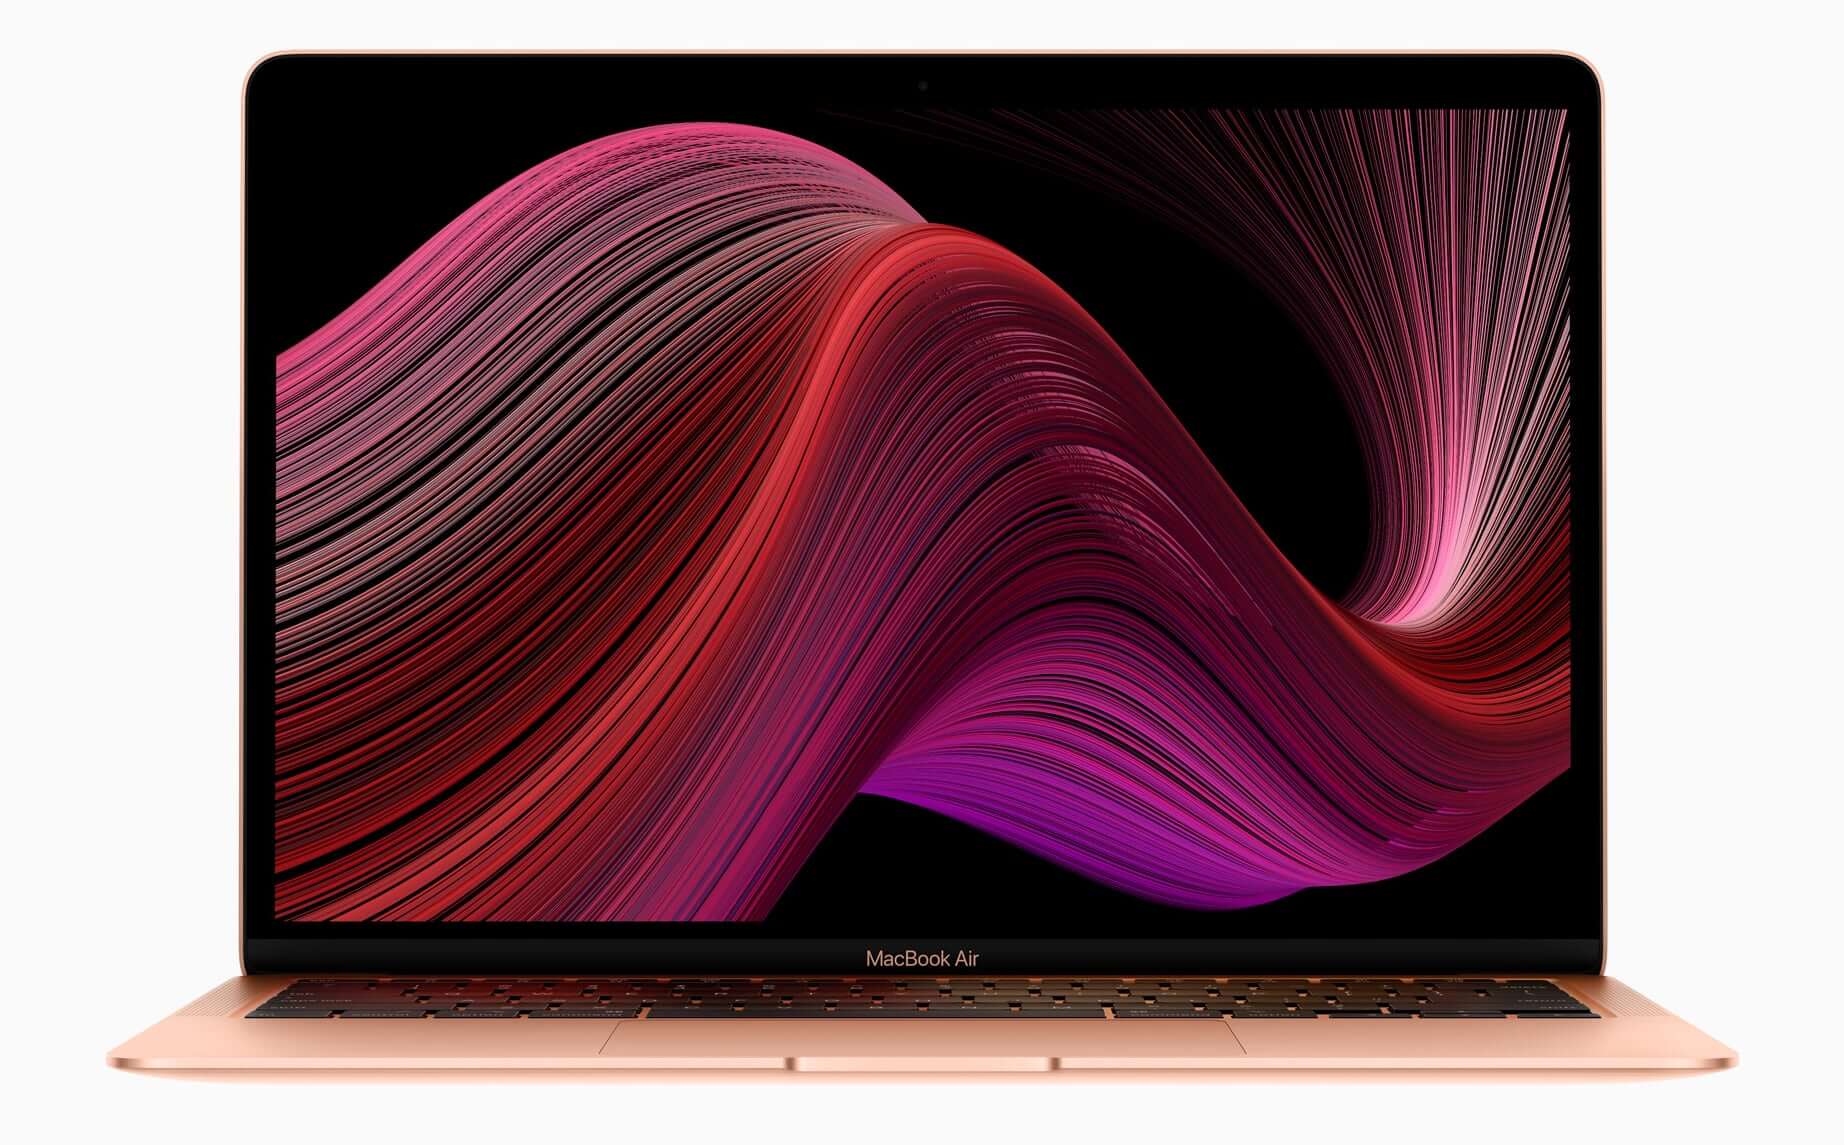 Apple updates MacBook Air with improved internals for $999, new iPad Pro with Magic Keyboard